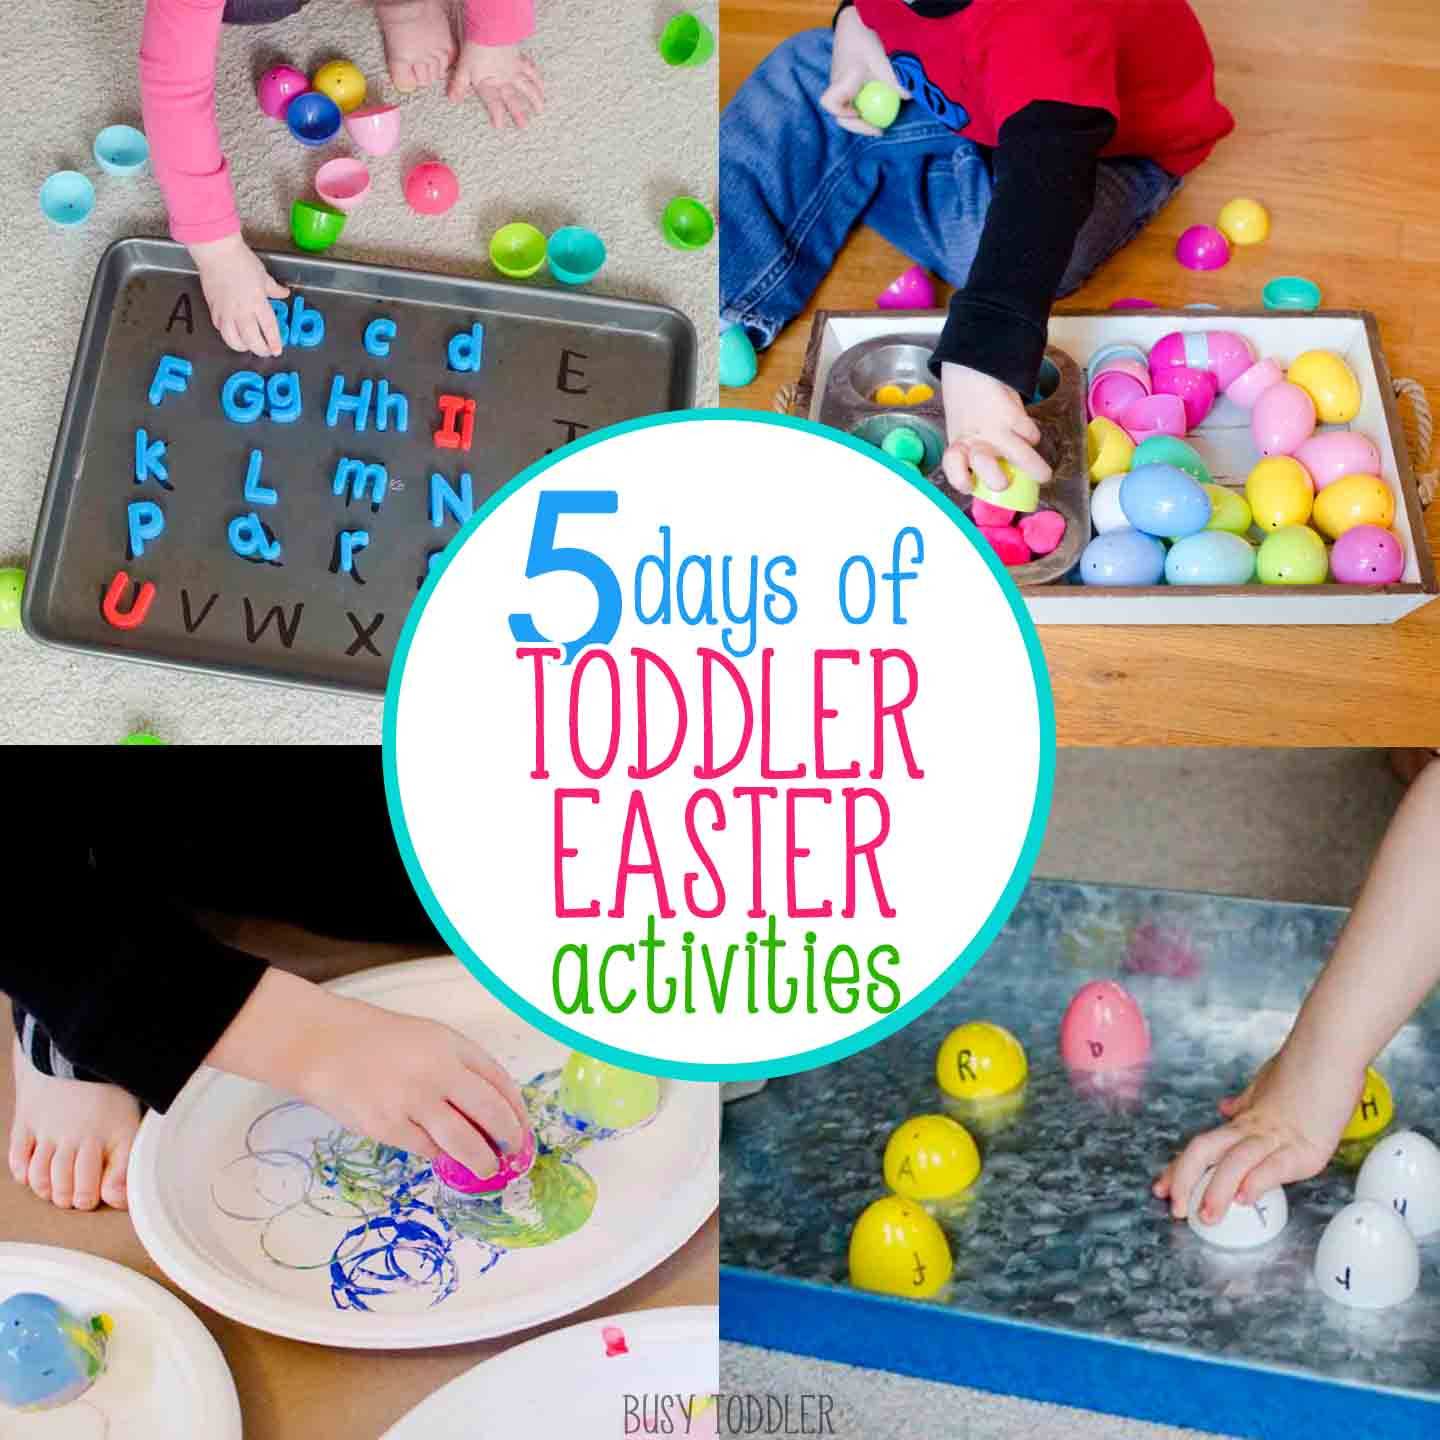 Toddlers Easter Activities Elegant A Very toddler Easter Busy toddler